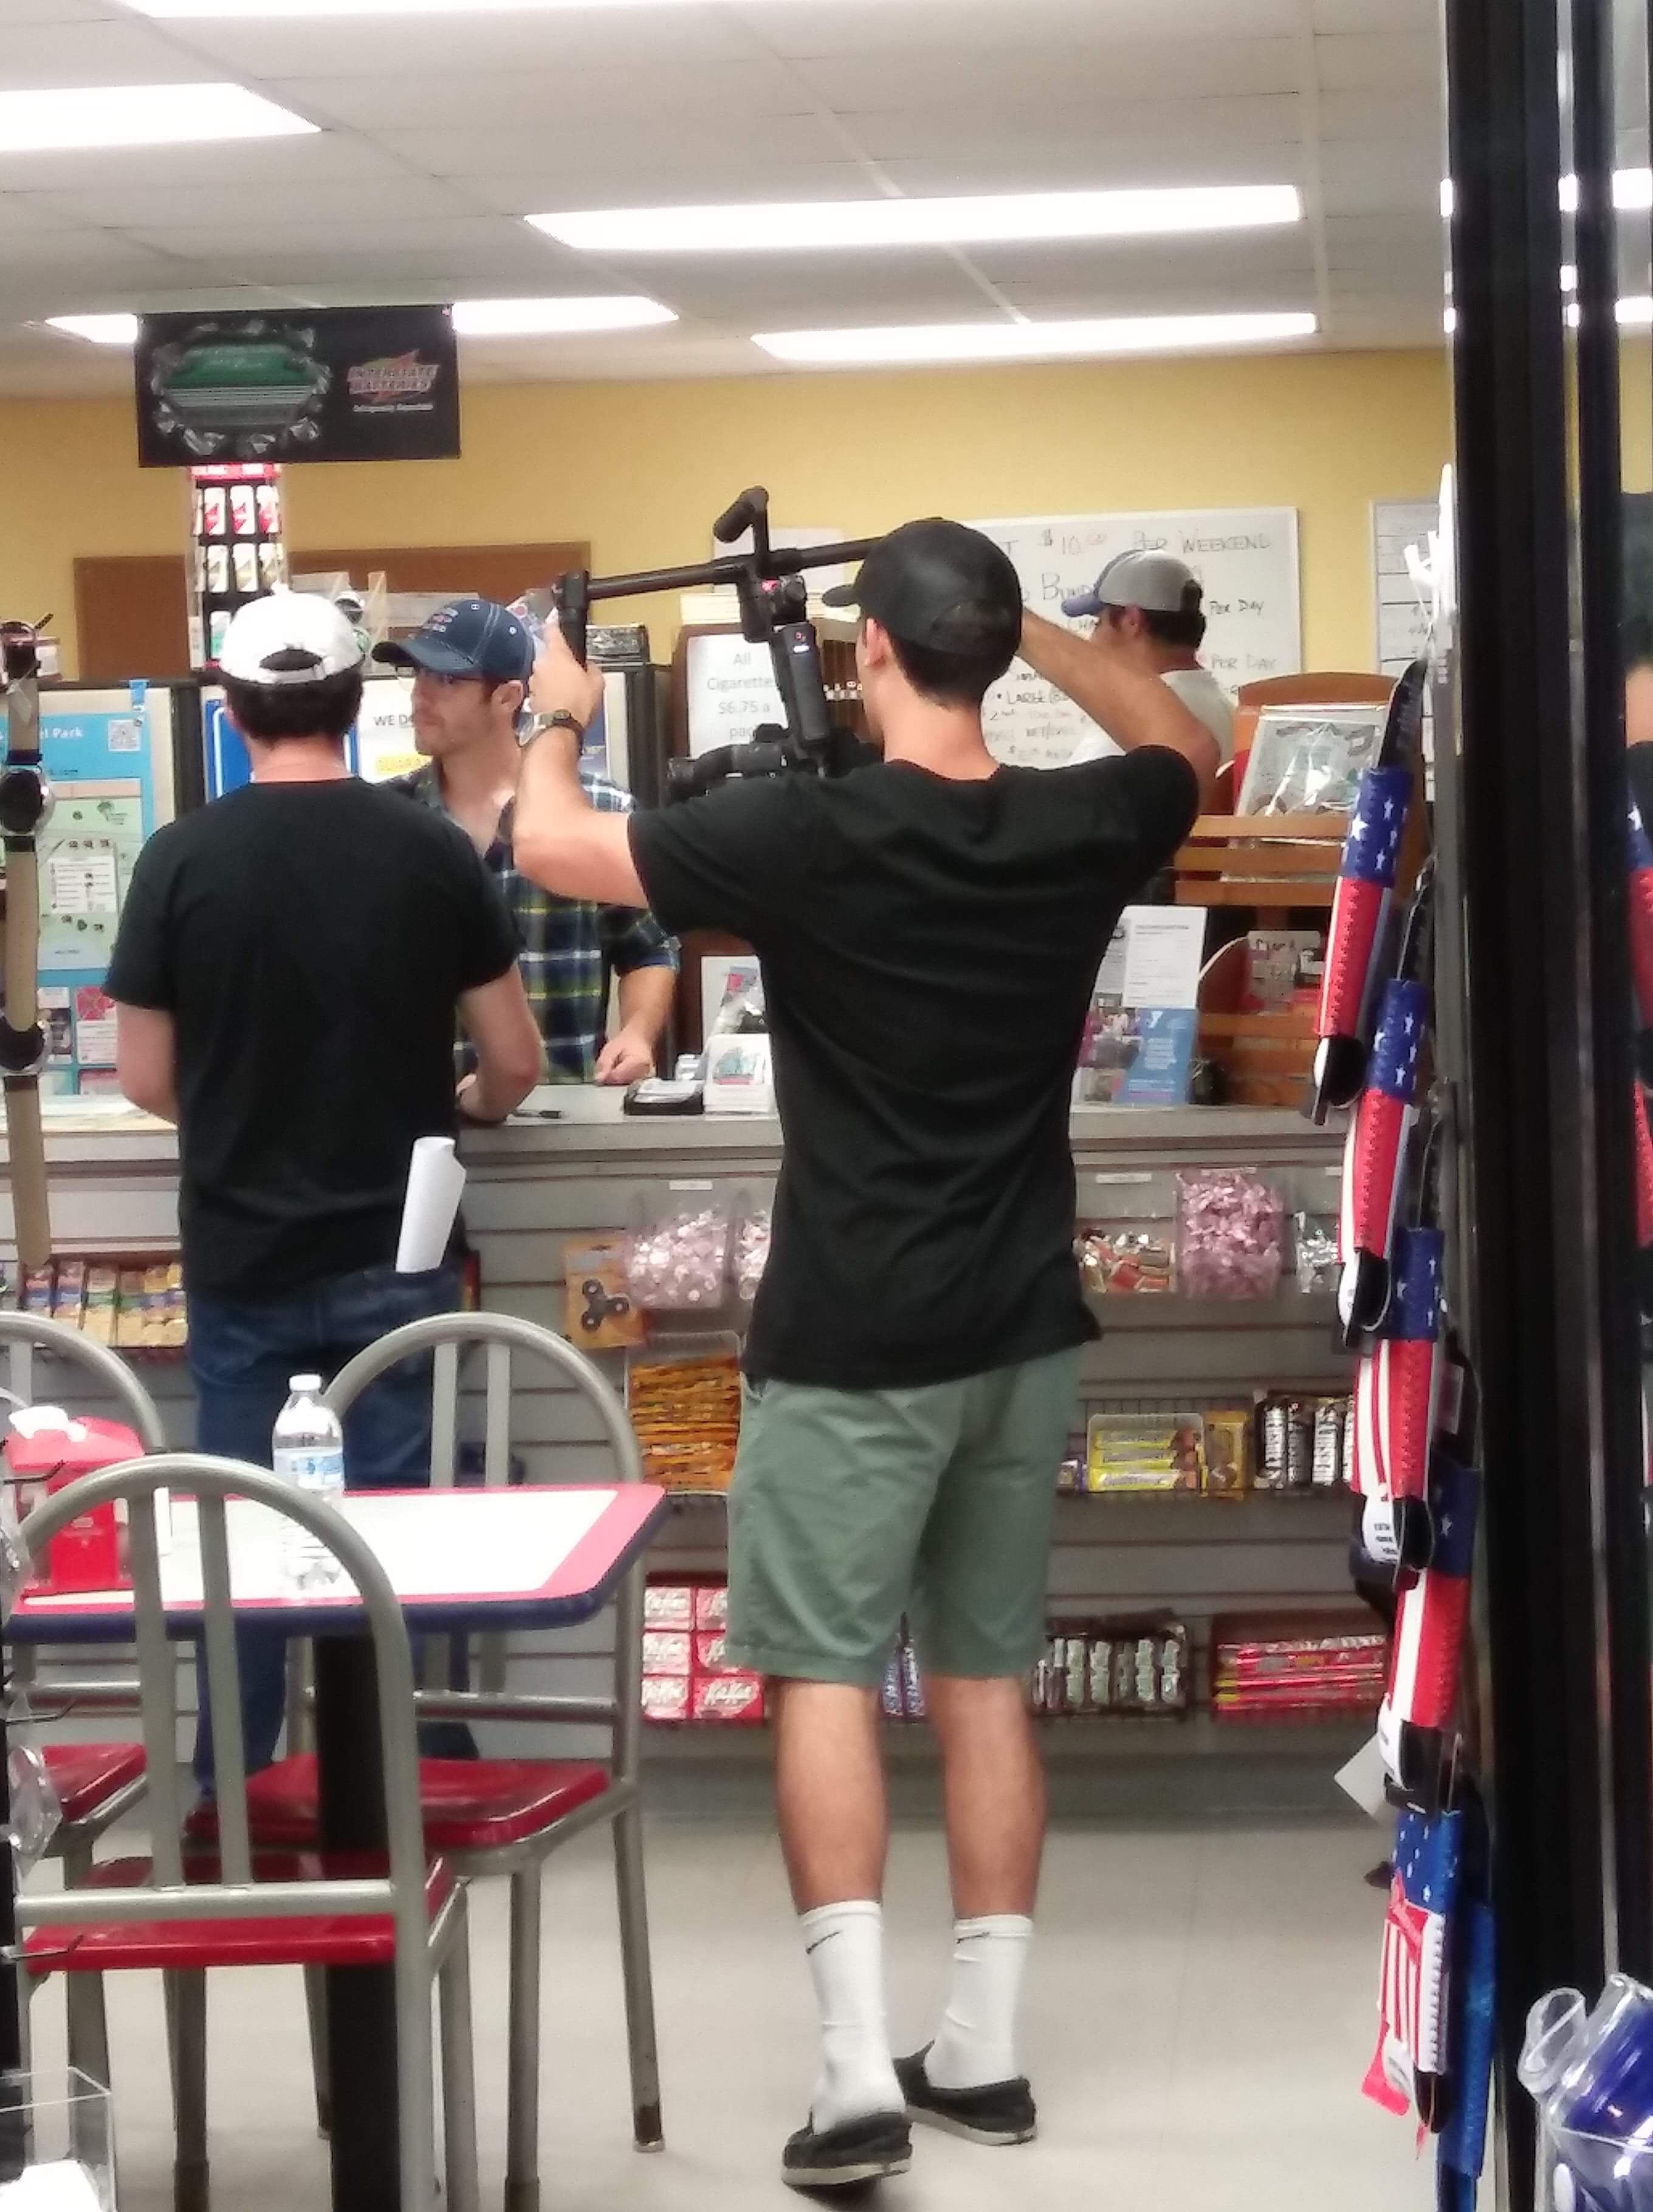 Student film crew filming in the store.